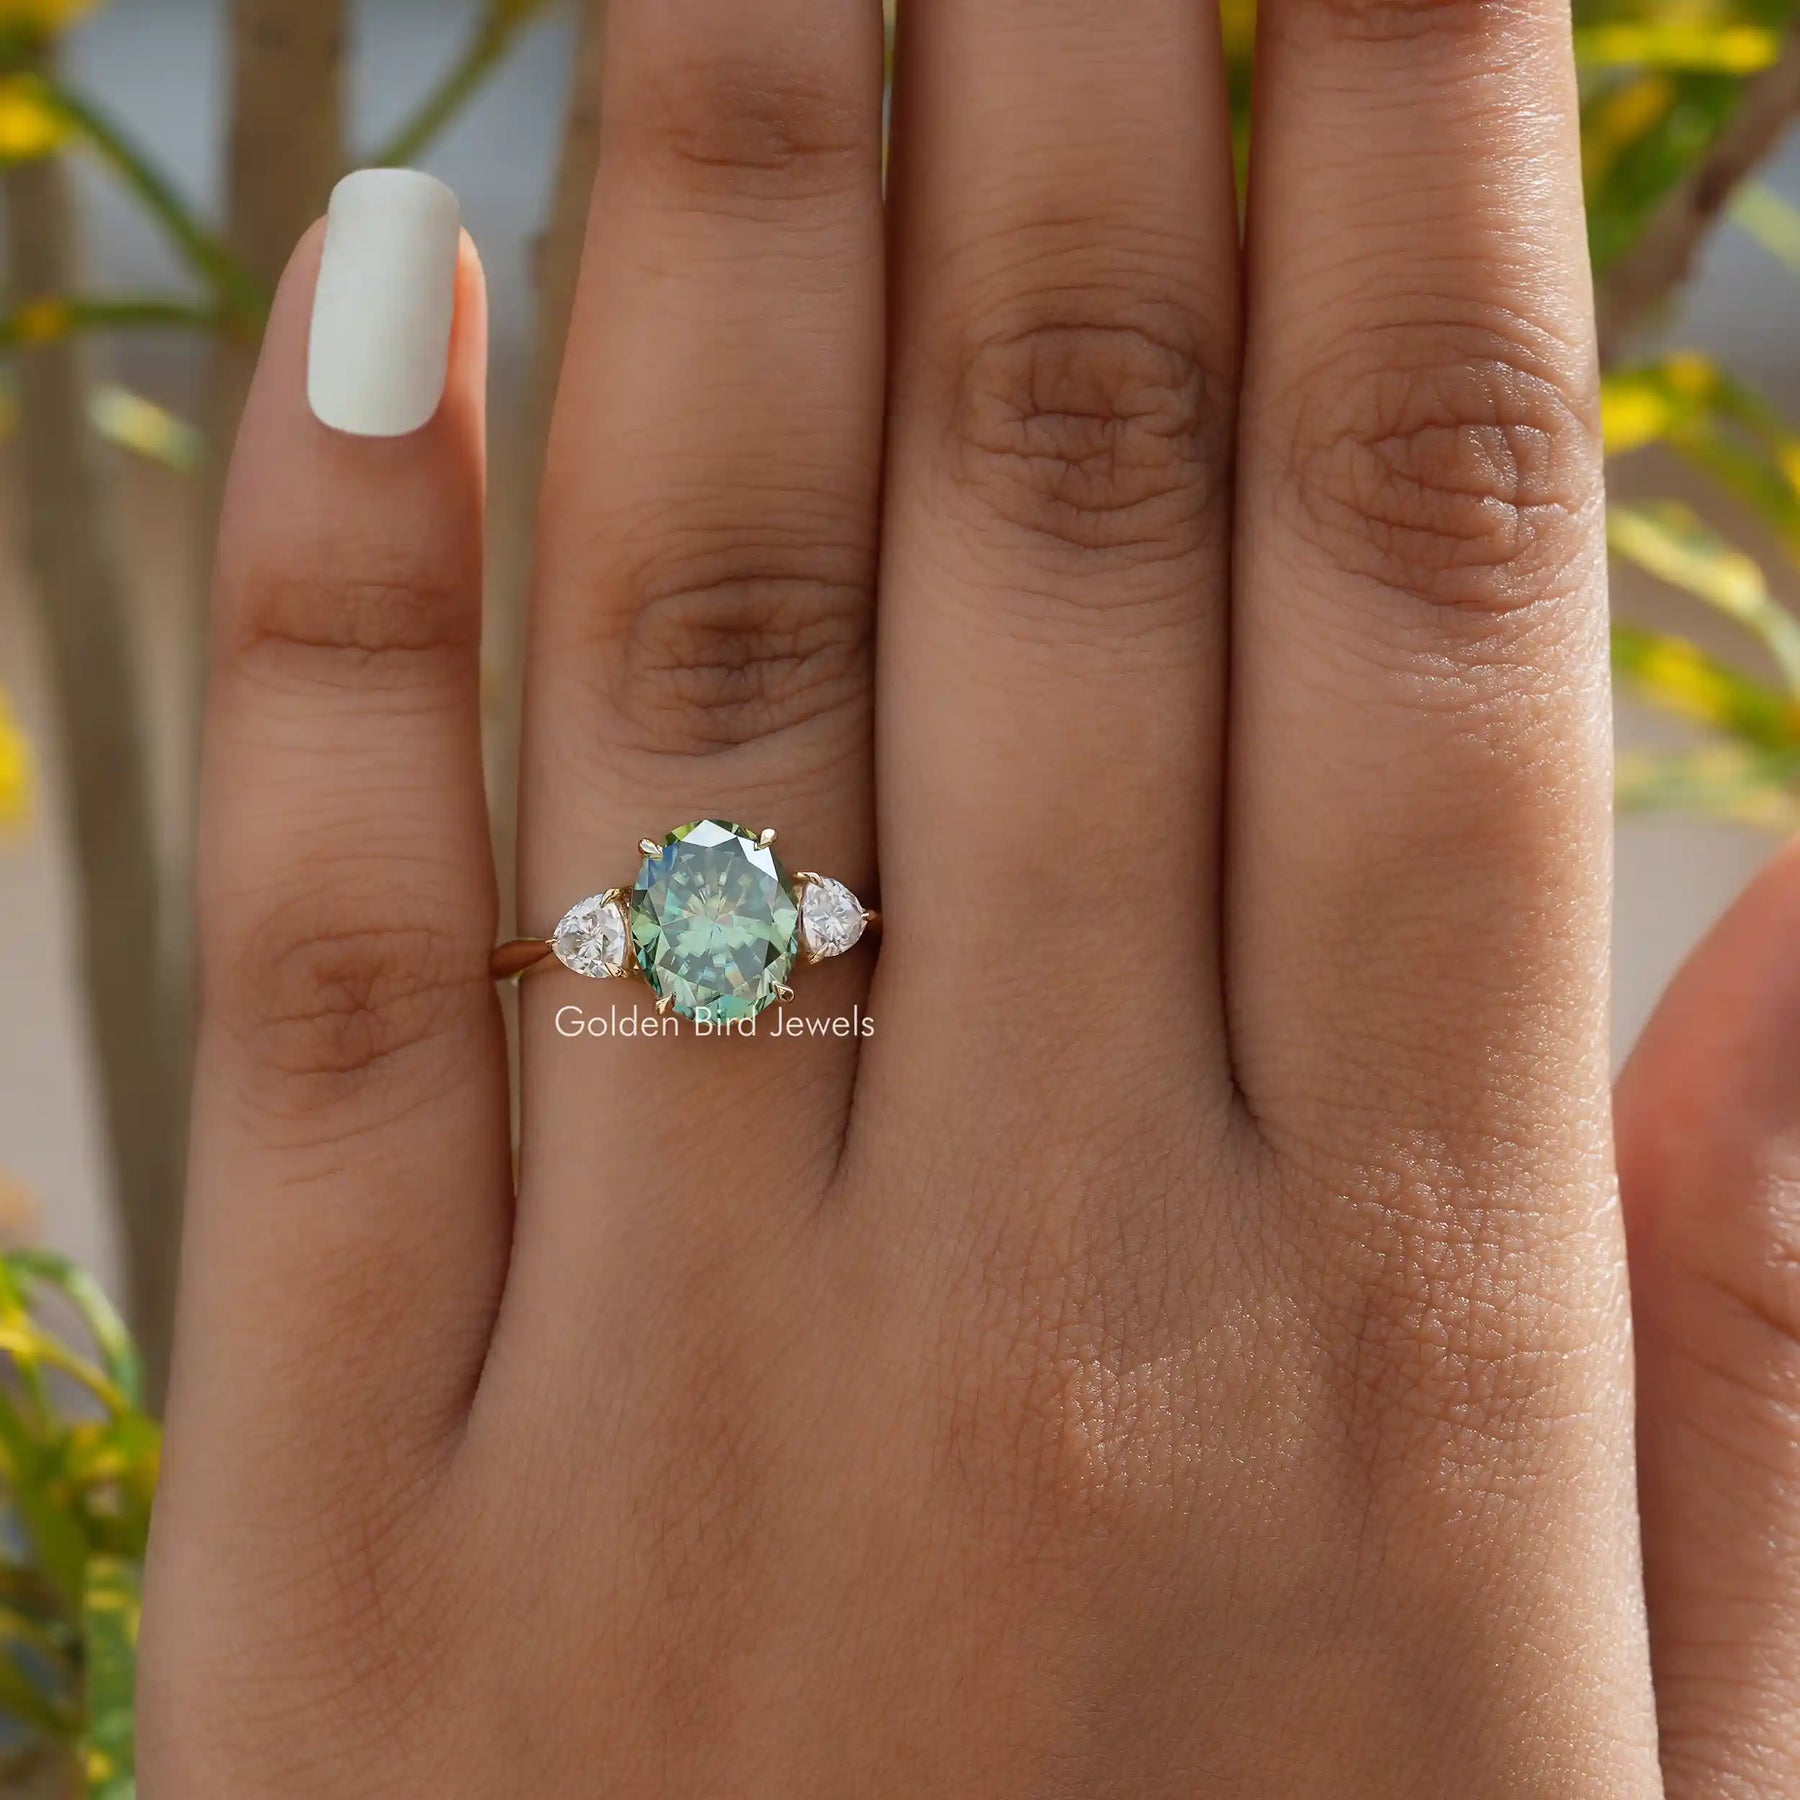 [This moissanite ring made of three stones with prong setting]-[Golden Bird Jewels]